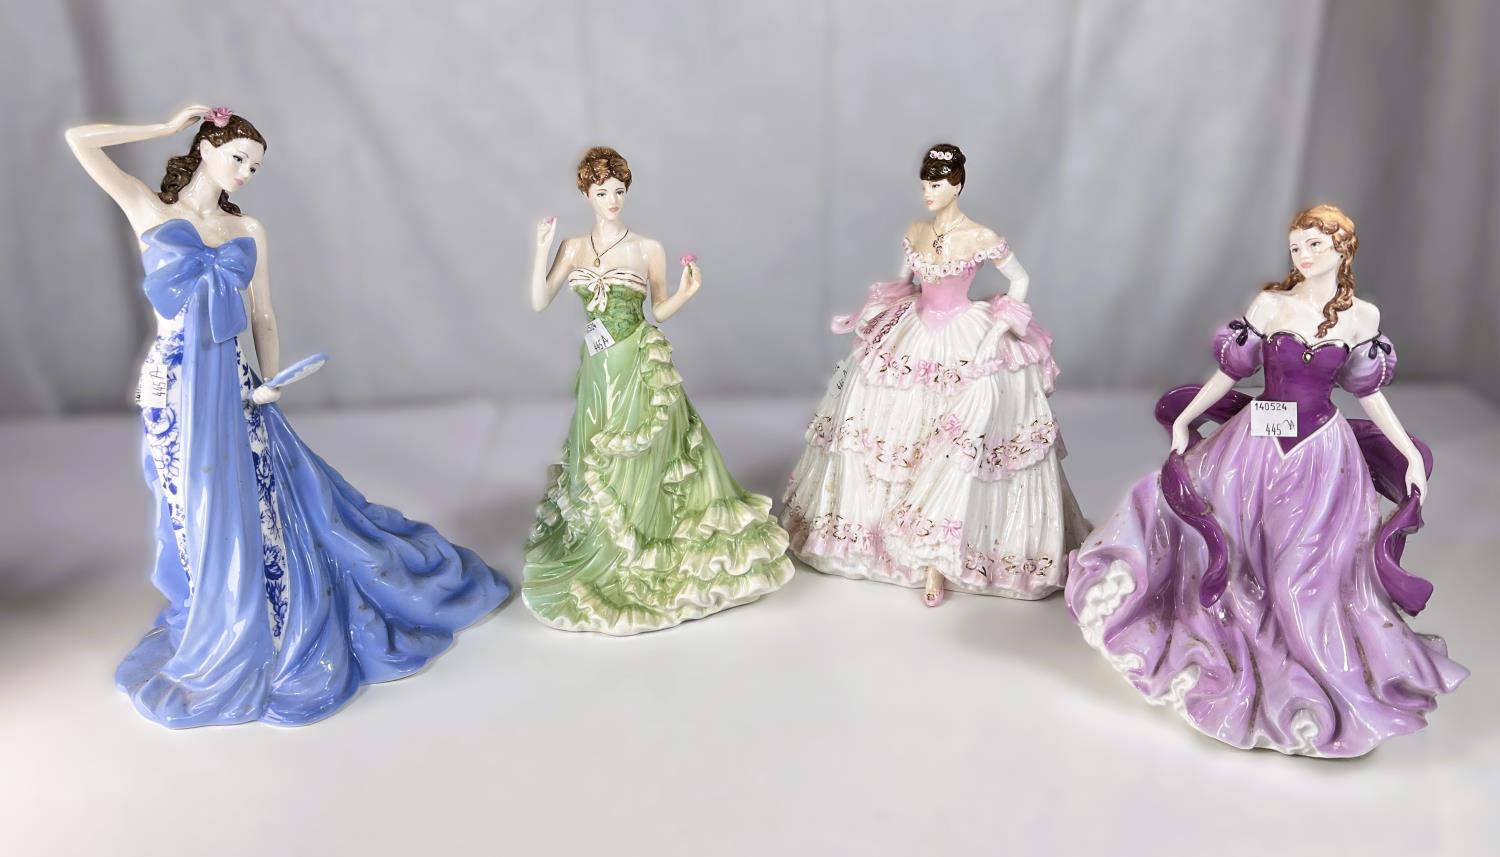 Royal Staffordshire: Four limited edition ceramic figures 'Loves me, Loves me not' 26/950, 'Hannah